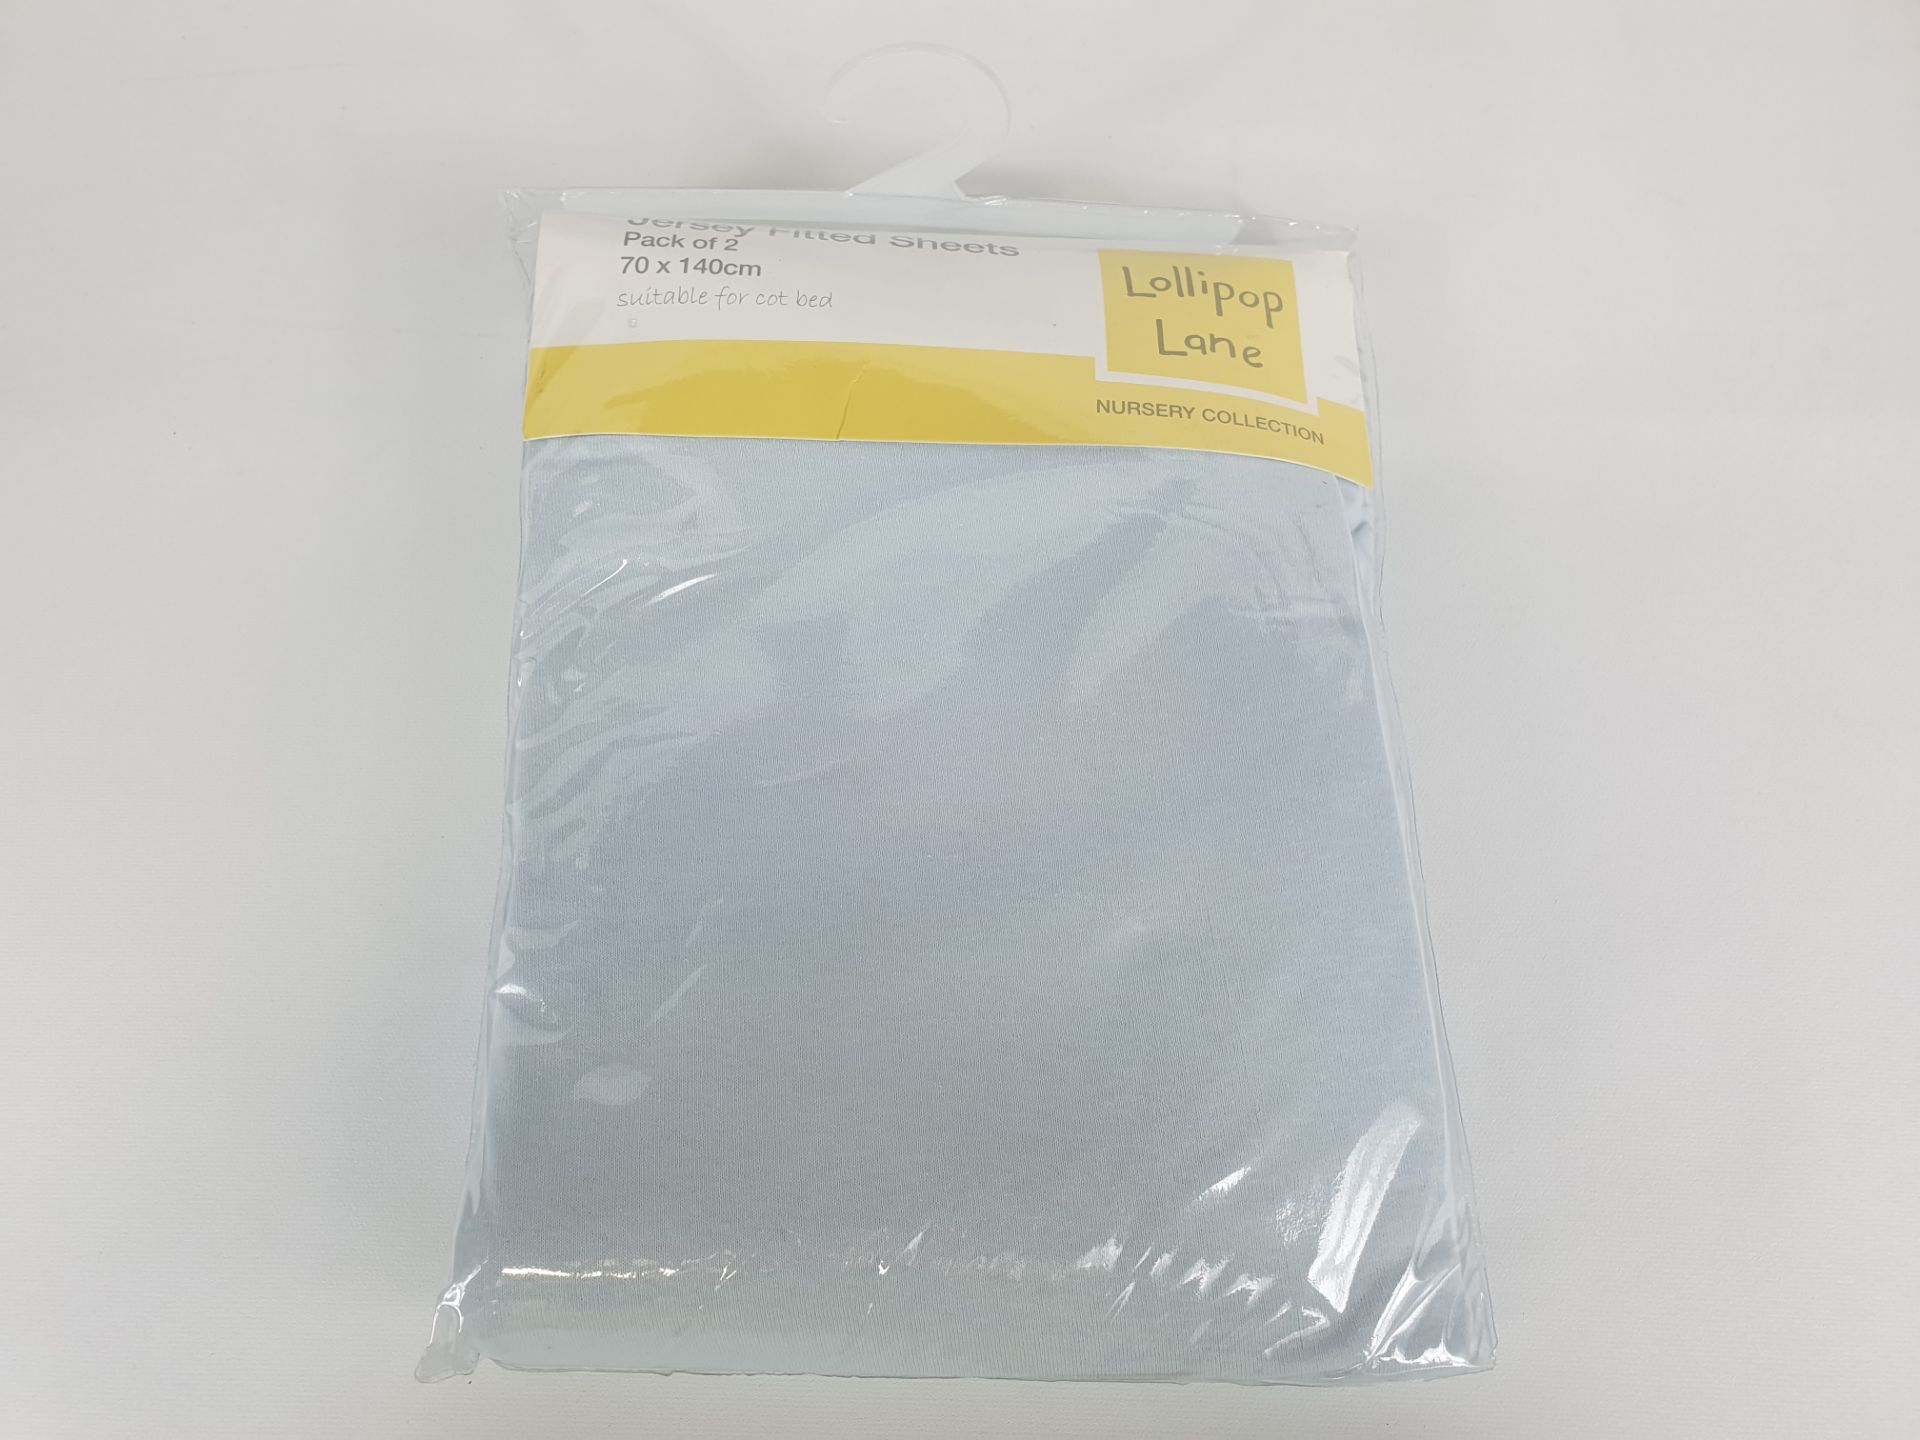 29 X PACKS OF 2 BLUE LOLLIPOP LANE JERSEY FITTED SHEETS SIZE 70 X 140 CM